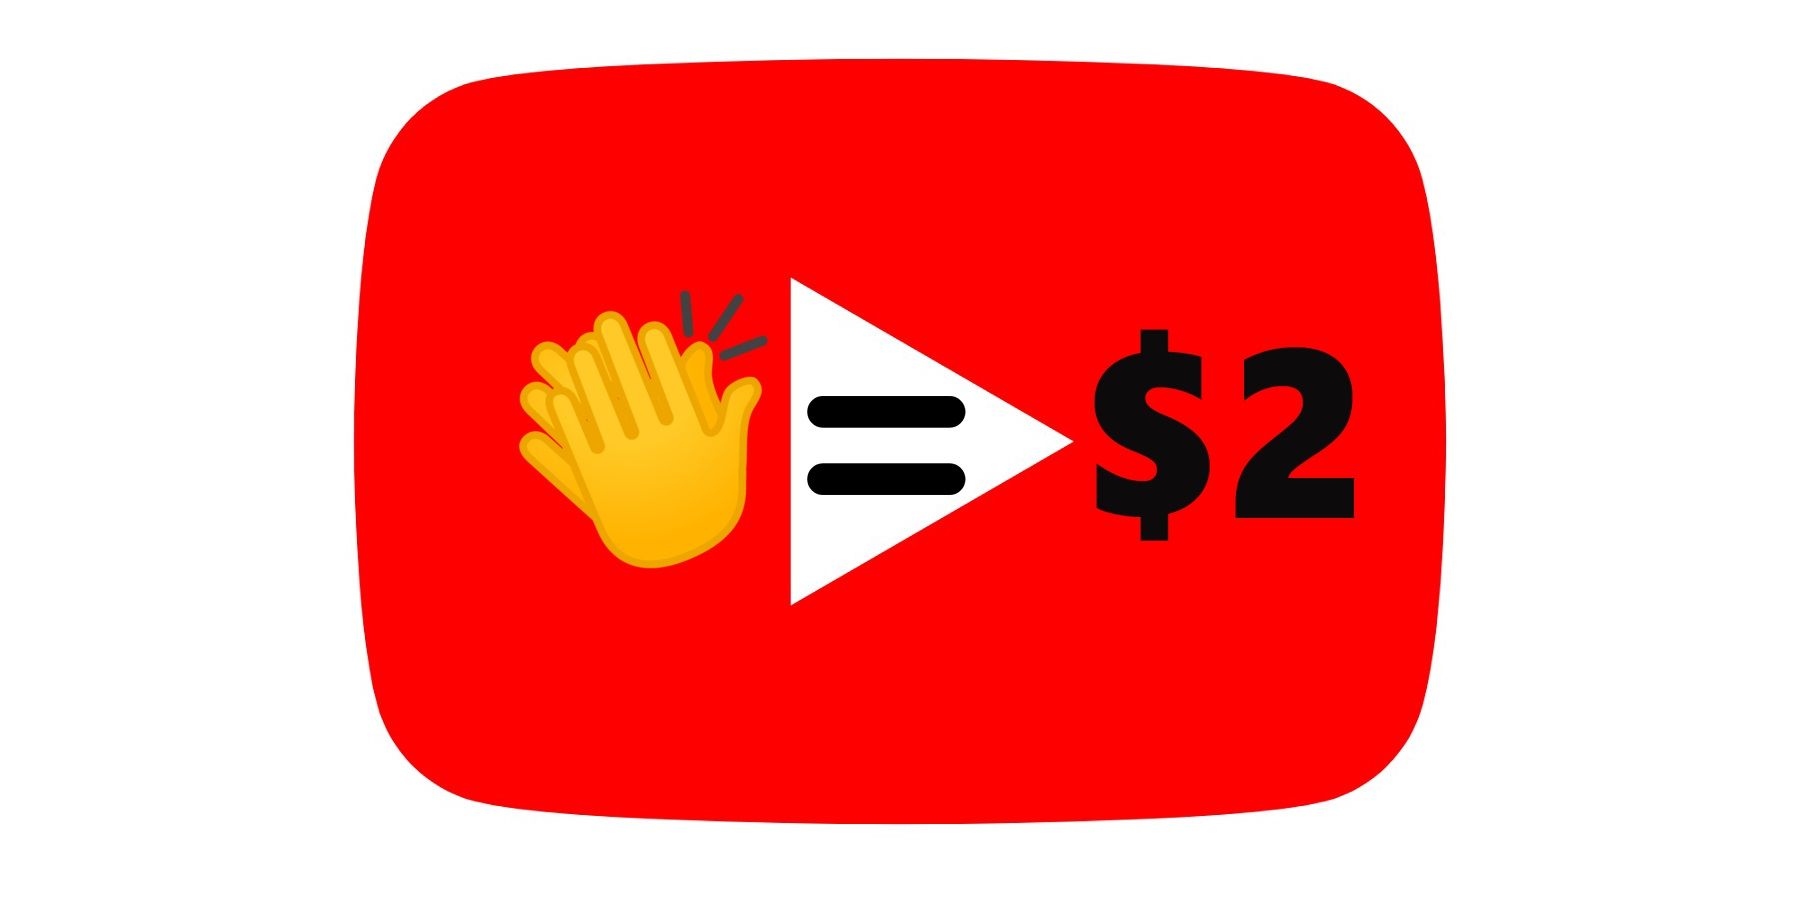 YouTube clapping